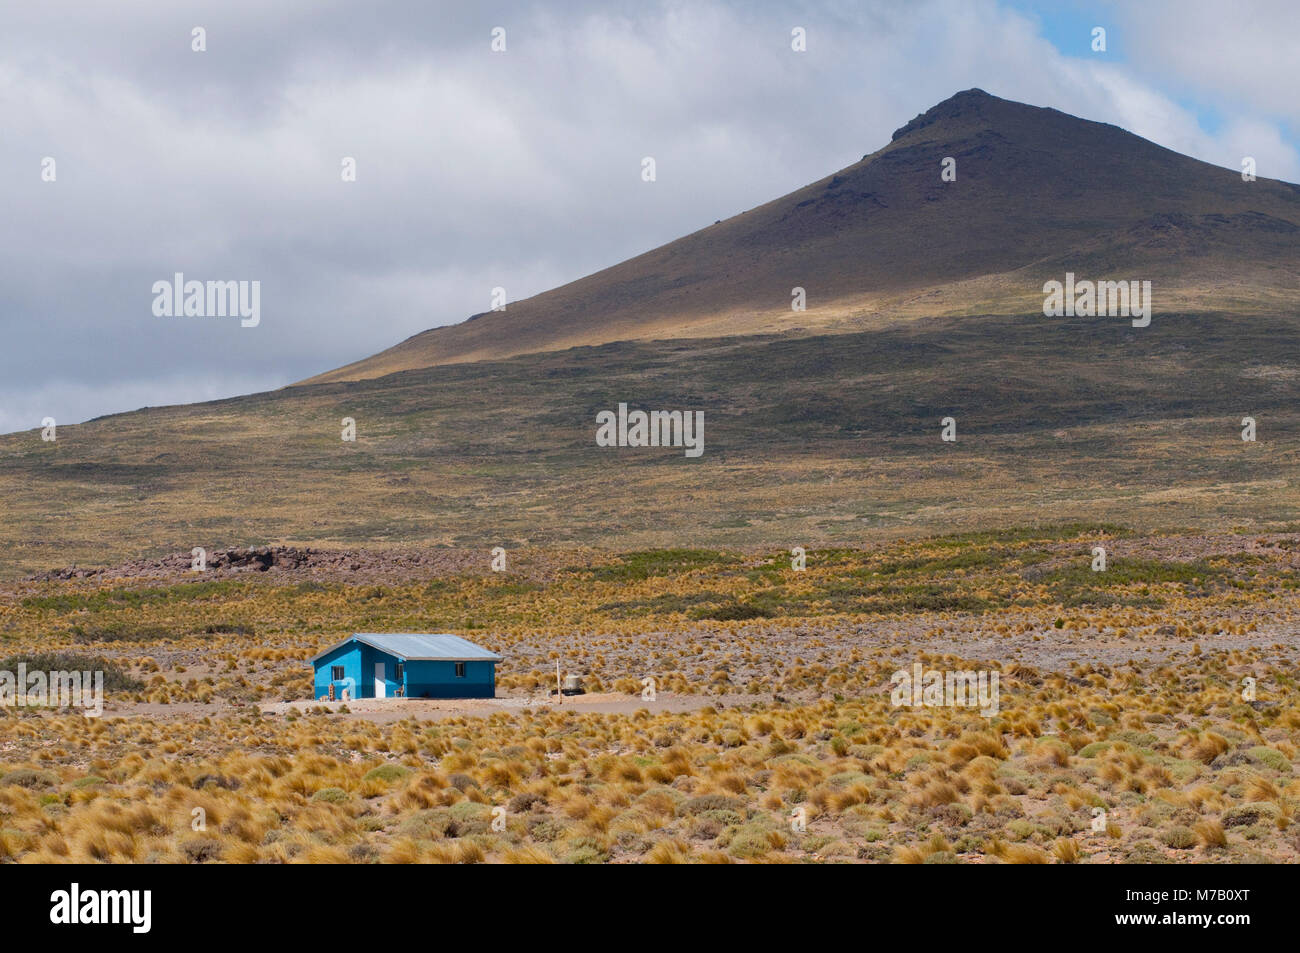 Lonely house in a desert, Patagonian Steppe, Cordillera de los Andes, Patagonia, Argentina Stock Photo